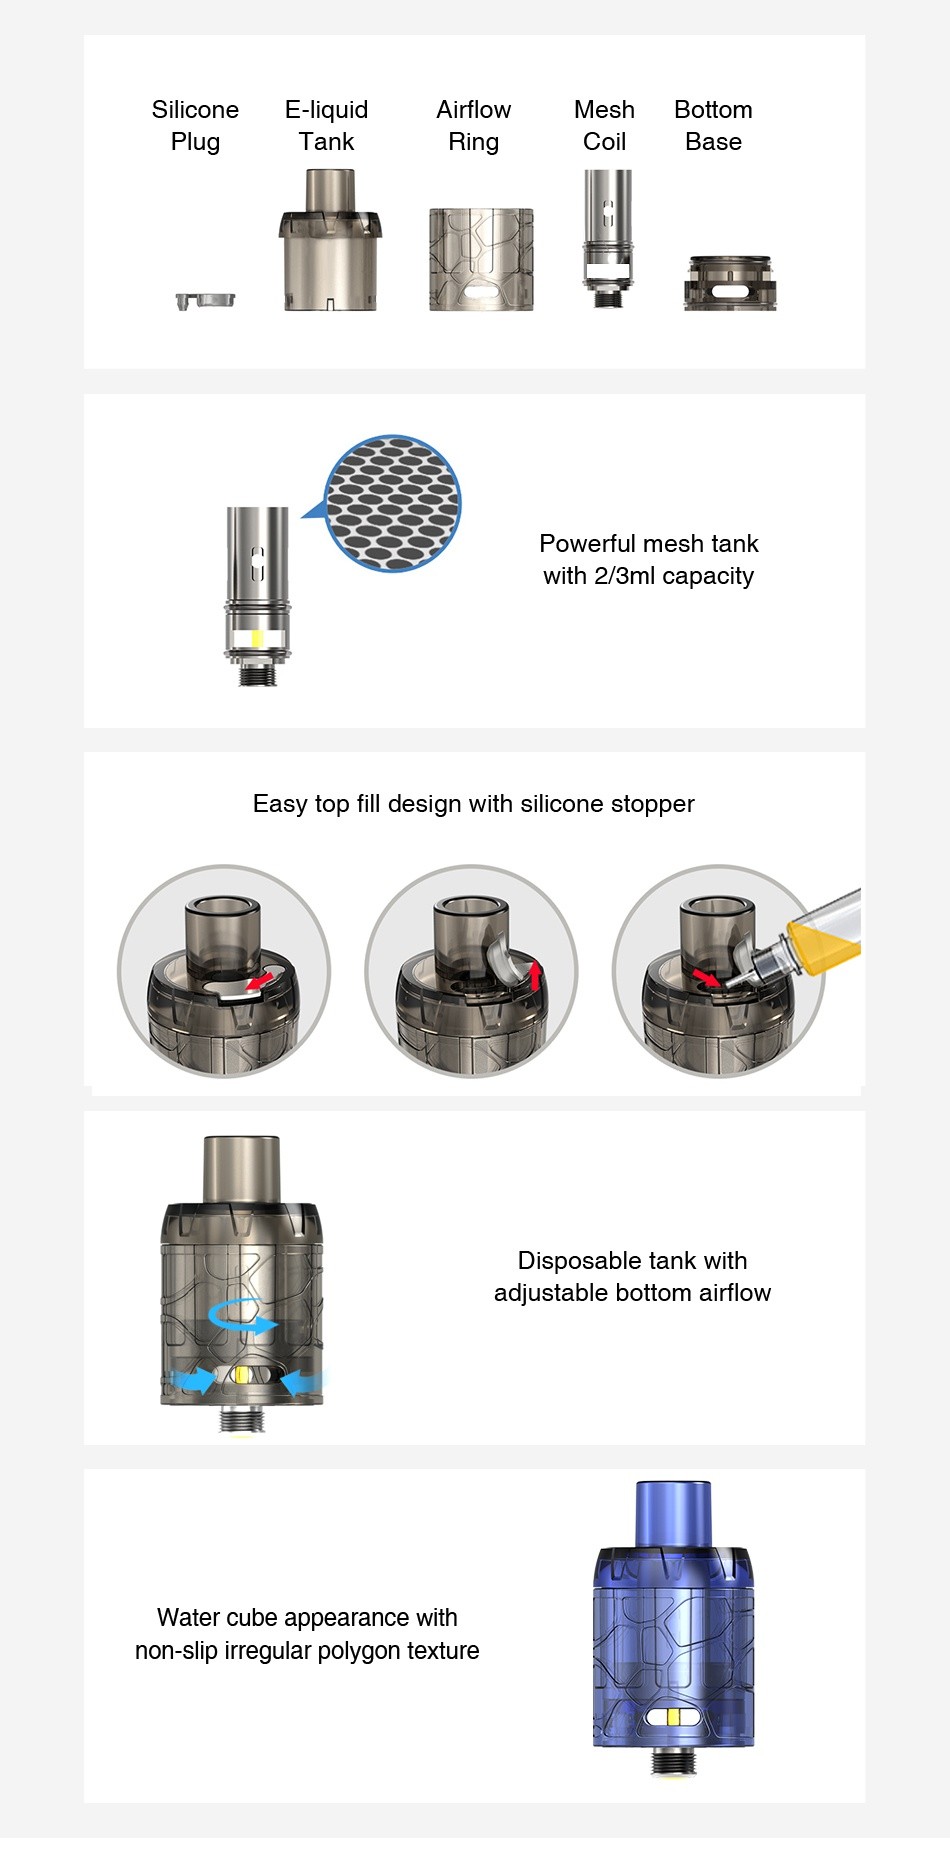 IJOY Mystique Mesh Tank 2ml/3ml 3pcs Silicone E liquid Airflow Mesh Bottom ank Ring Coi Base Powerful mesh tan with 2 3ml capacity Easy top fill design with silicone stopper Disposable tank with adiustable bottom airflow Water cube appearance with non slip irregular polygon texture